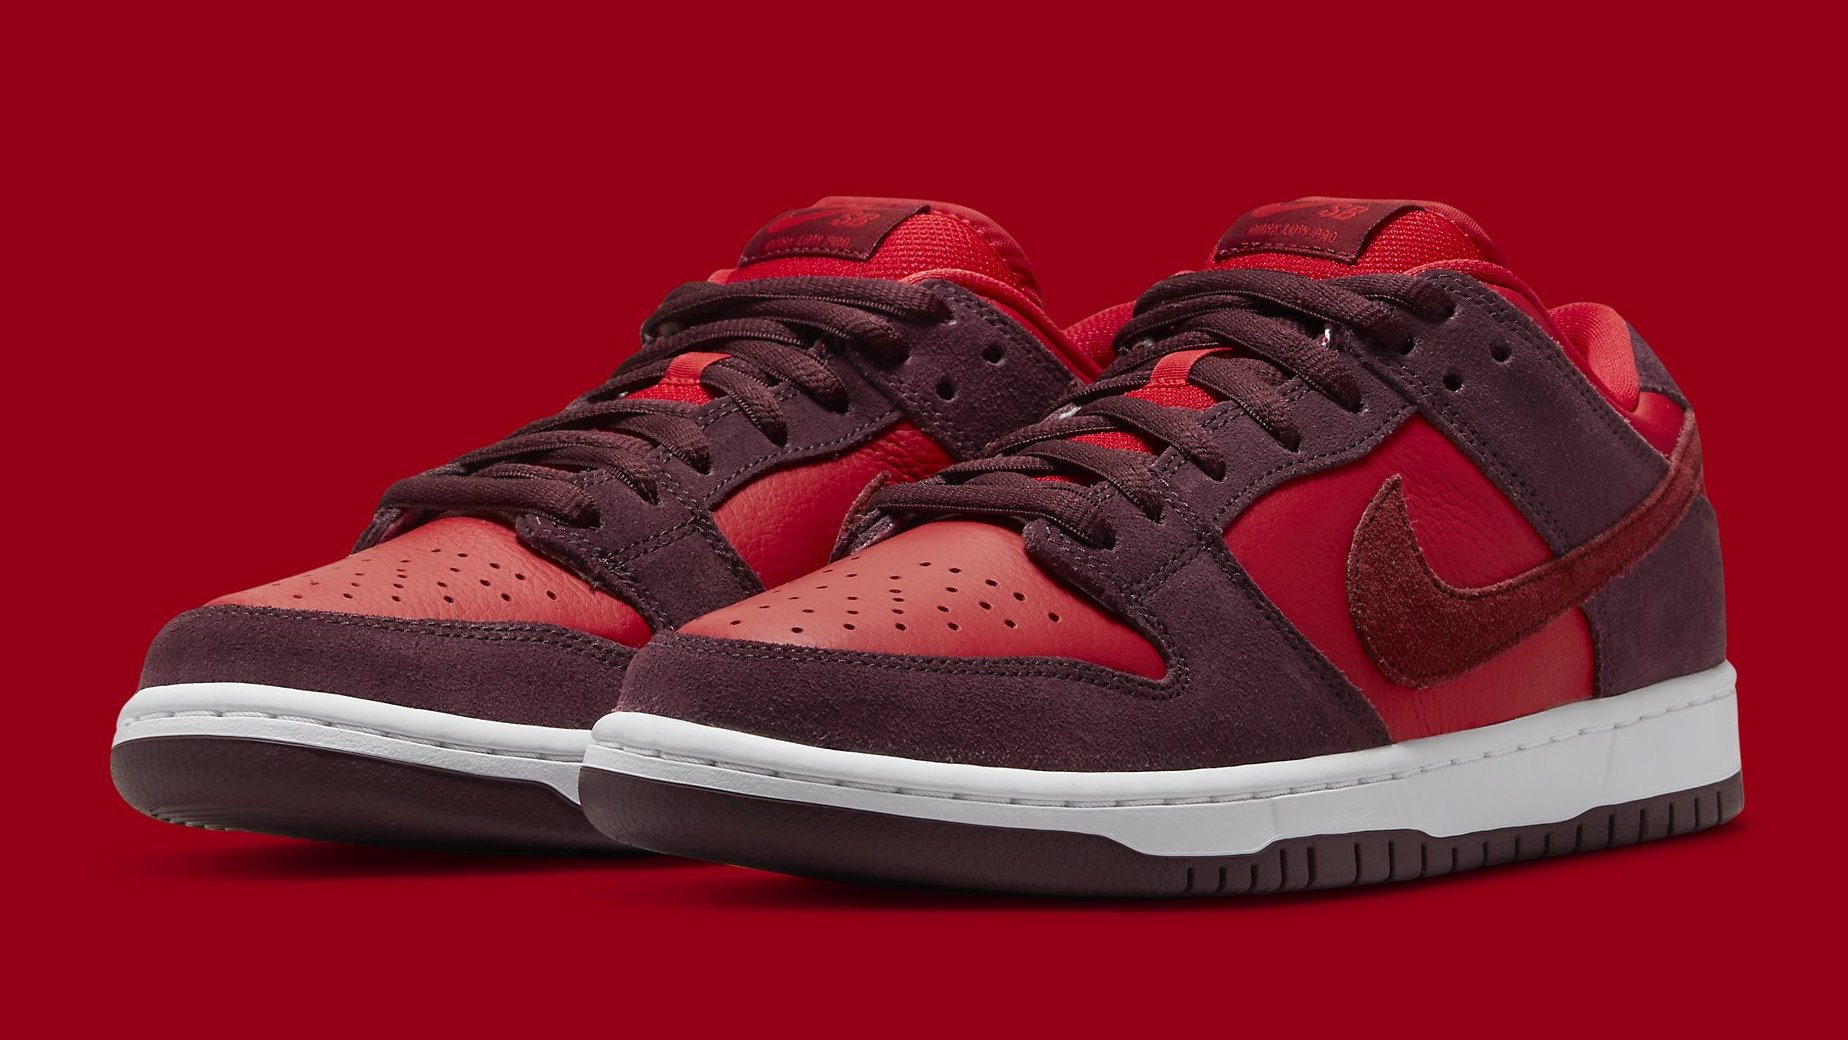 NIKE SB dunk low cherry “Fruity Pack”